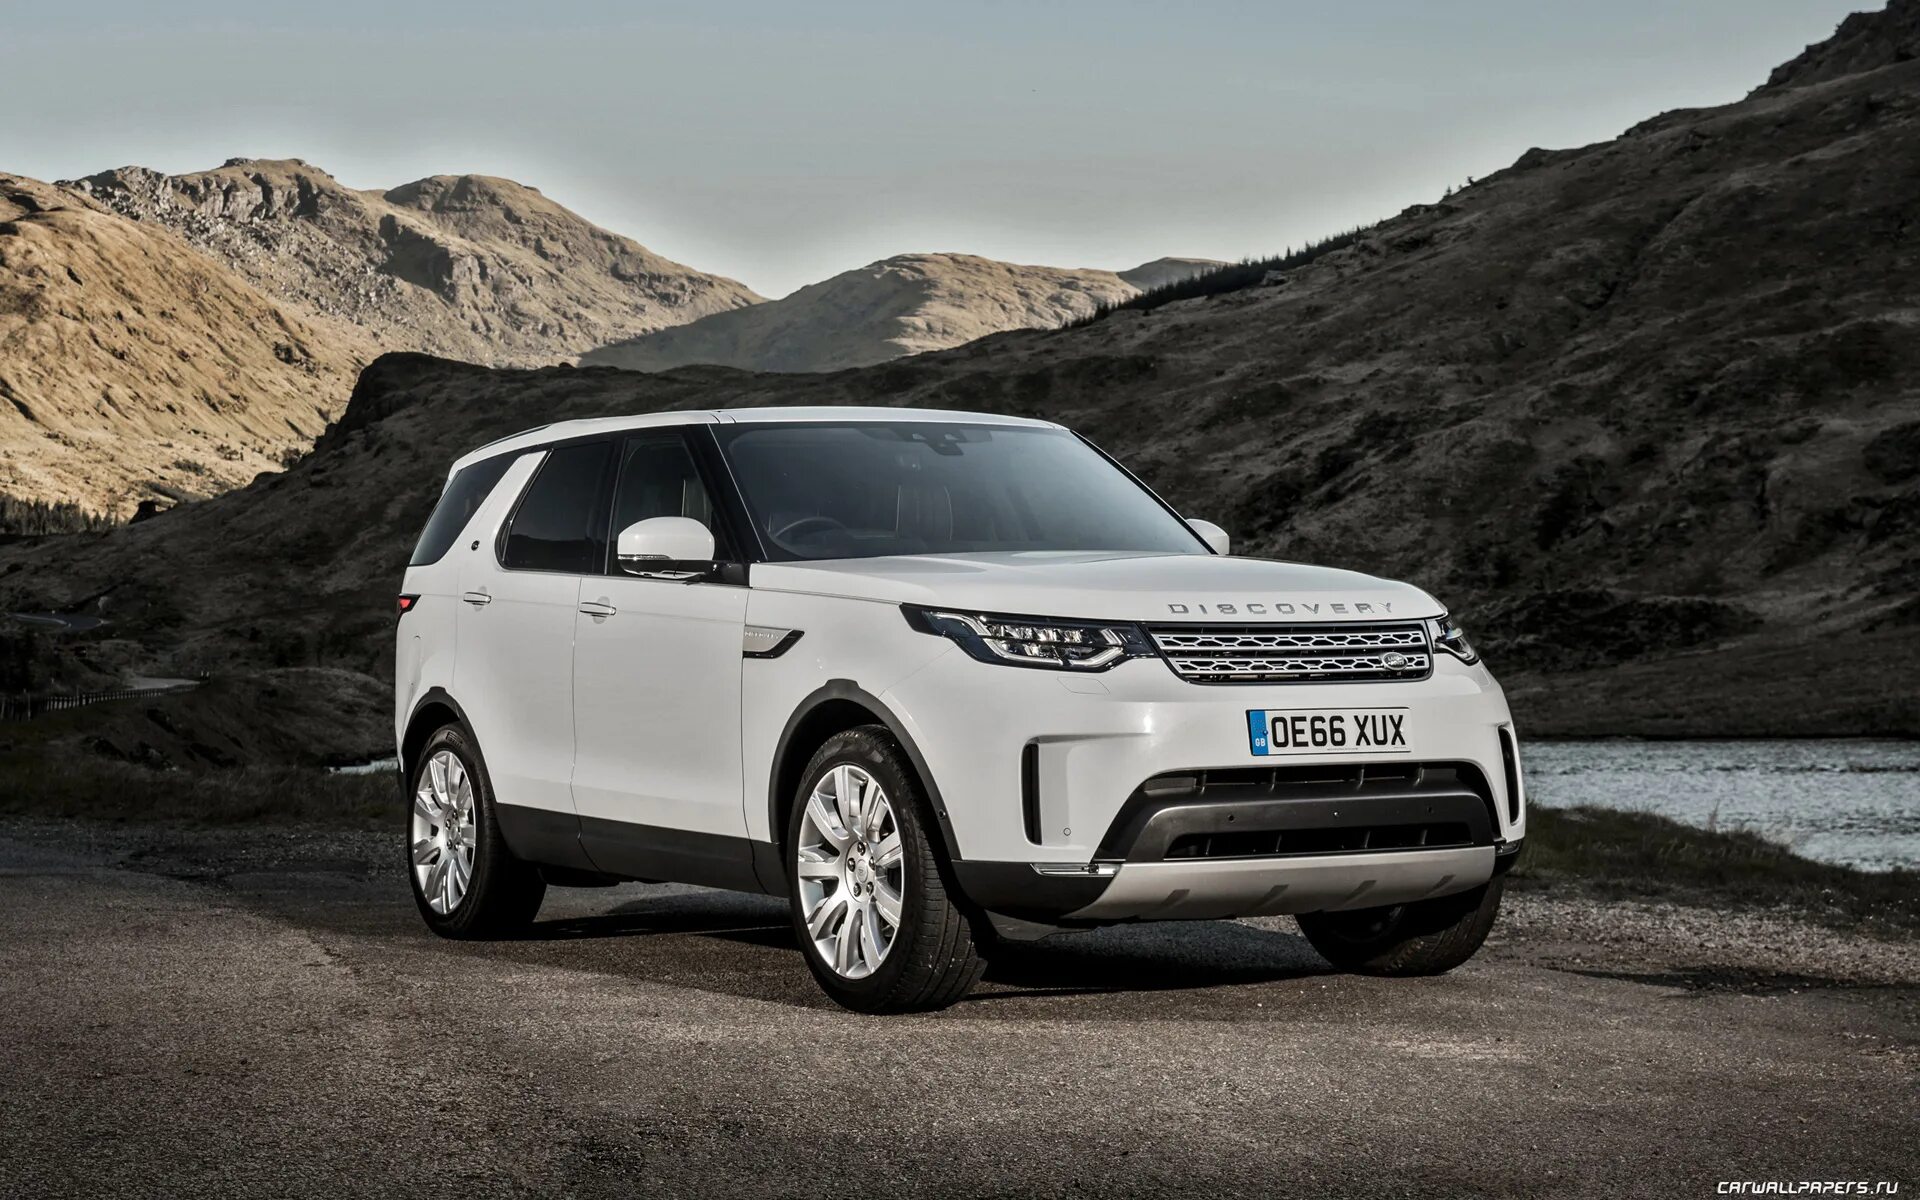 Купить новый дискавери. Land Rover Discovery 5. Range Rover Discovery 5. Лэндровер Ровер Дискавери 5. Land Rover Discovery 5 HSE.